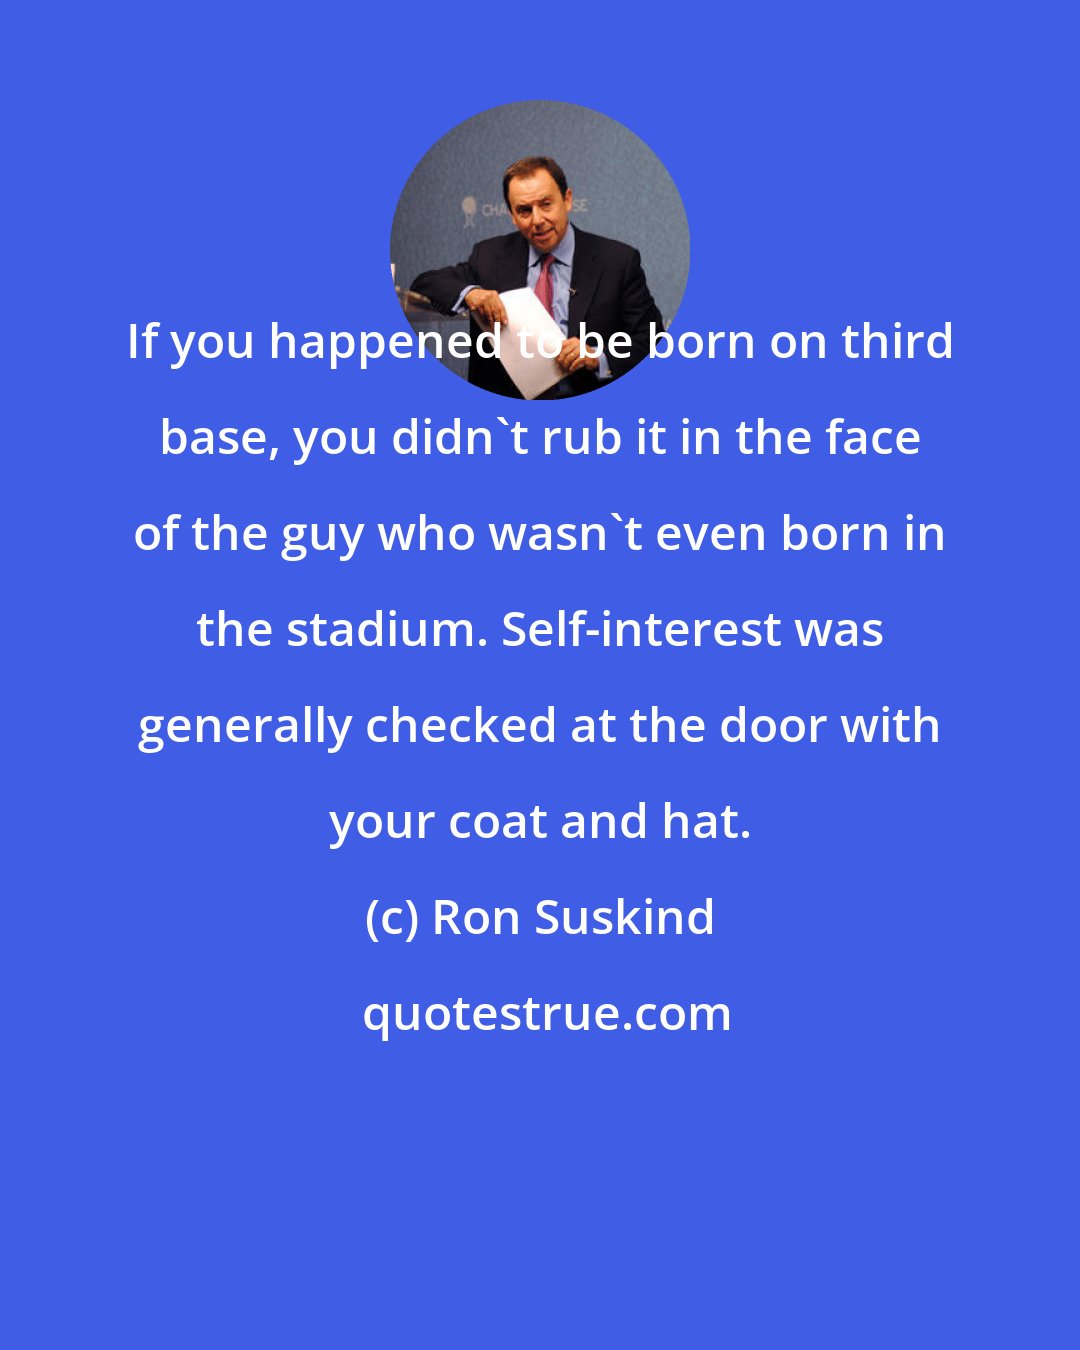 Ron Suskind: If you happened to be born on third base, you didn't rub it in the face of the guy who wasn't even born in the stadium. Self-interest was generally checked at the door with your coat and hat.